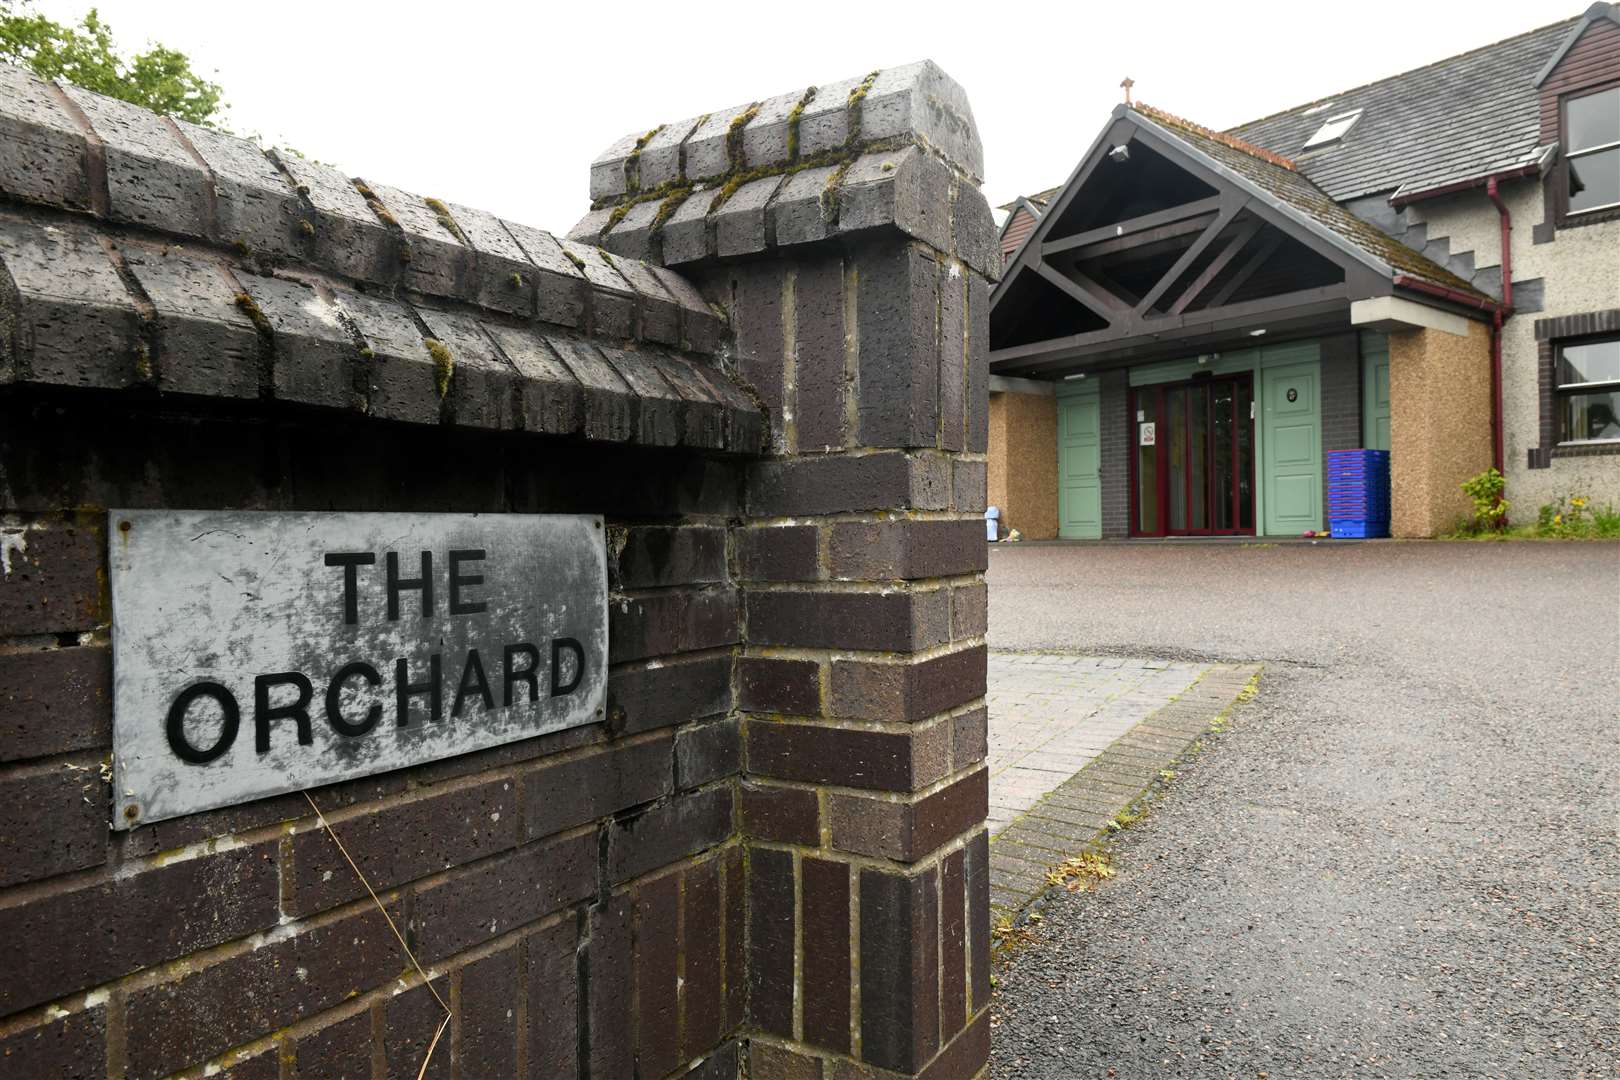 The Orchard care home in Lochardil, Inverness.